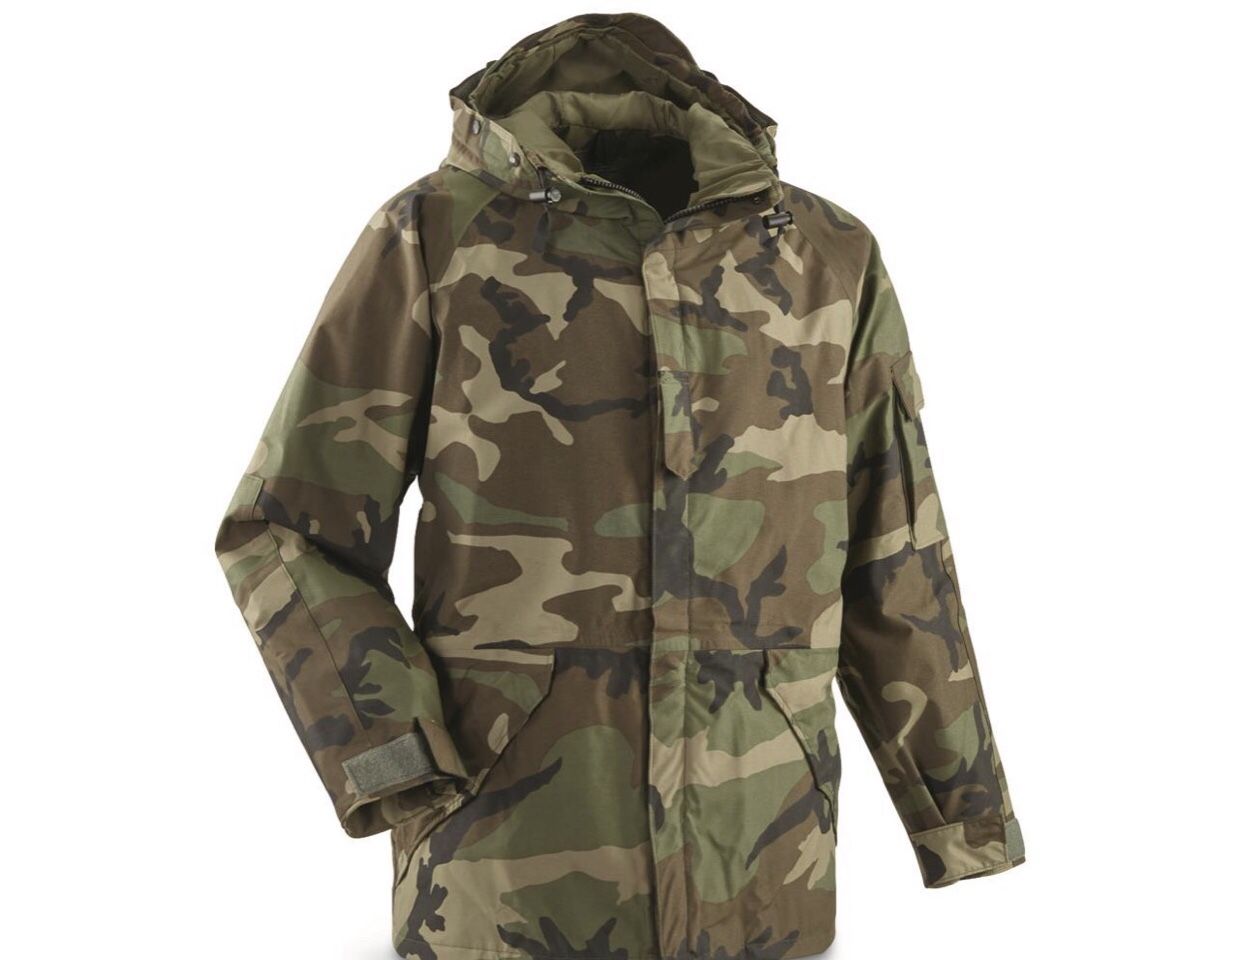 Authentic Army Issued Camouflage Parka